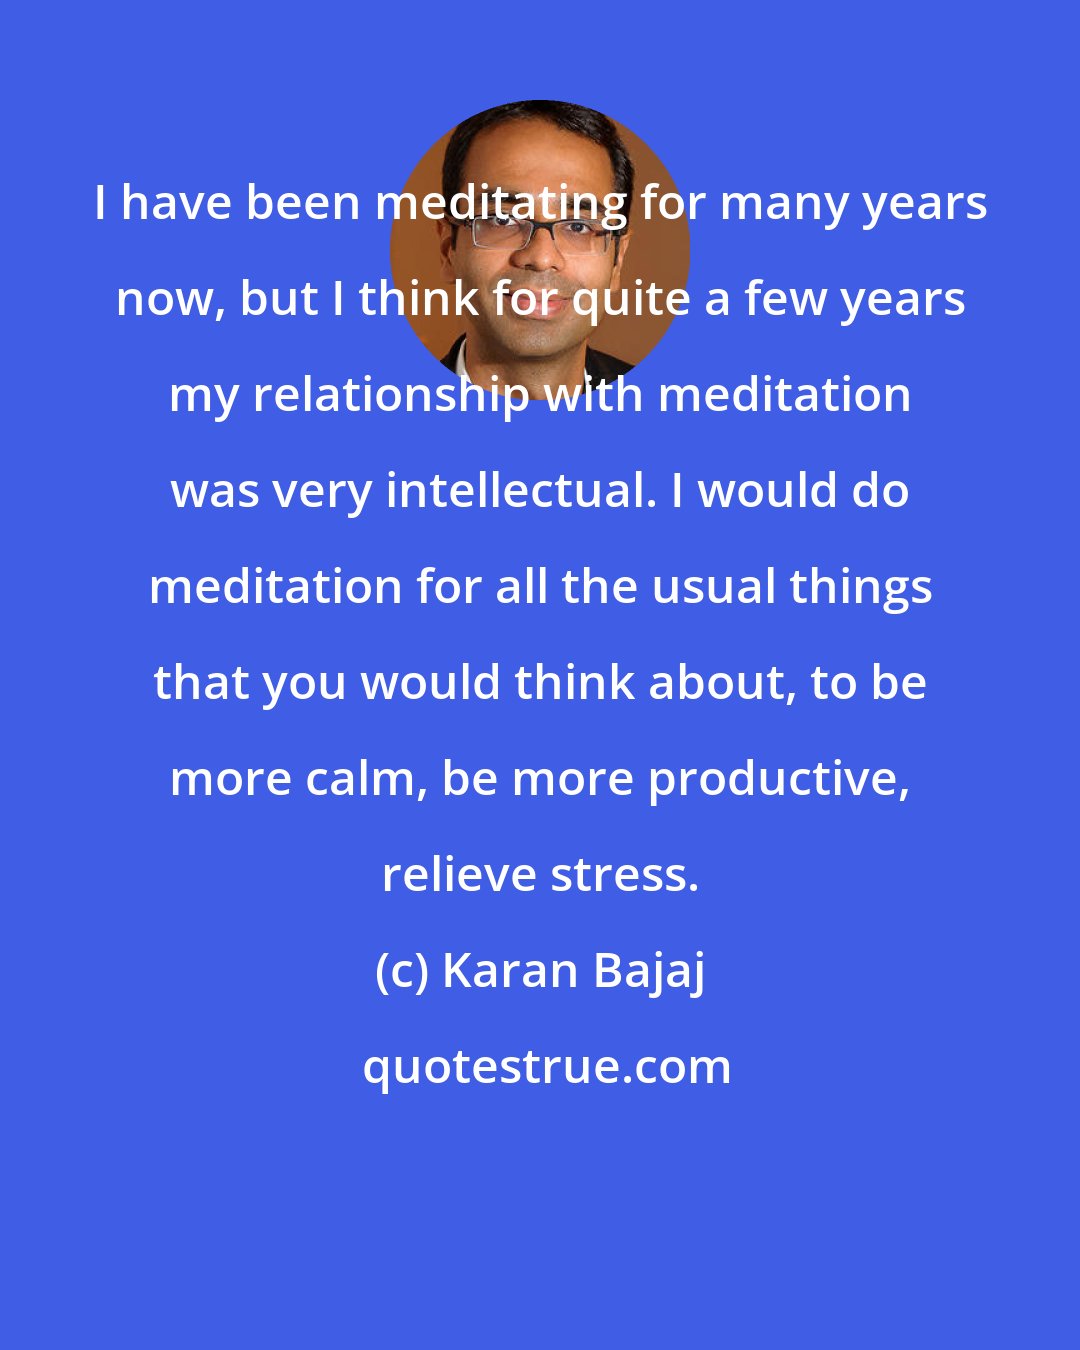 Karan Bajaj: I have been meditating for many years now, but I think for quite a few years my relationship with meditation was very intellectual. I would do meditation for all the usual things that you would think about, to be more calm, be more productive, relieve stress.